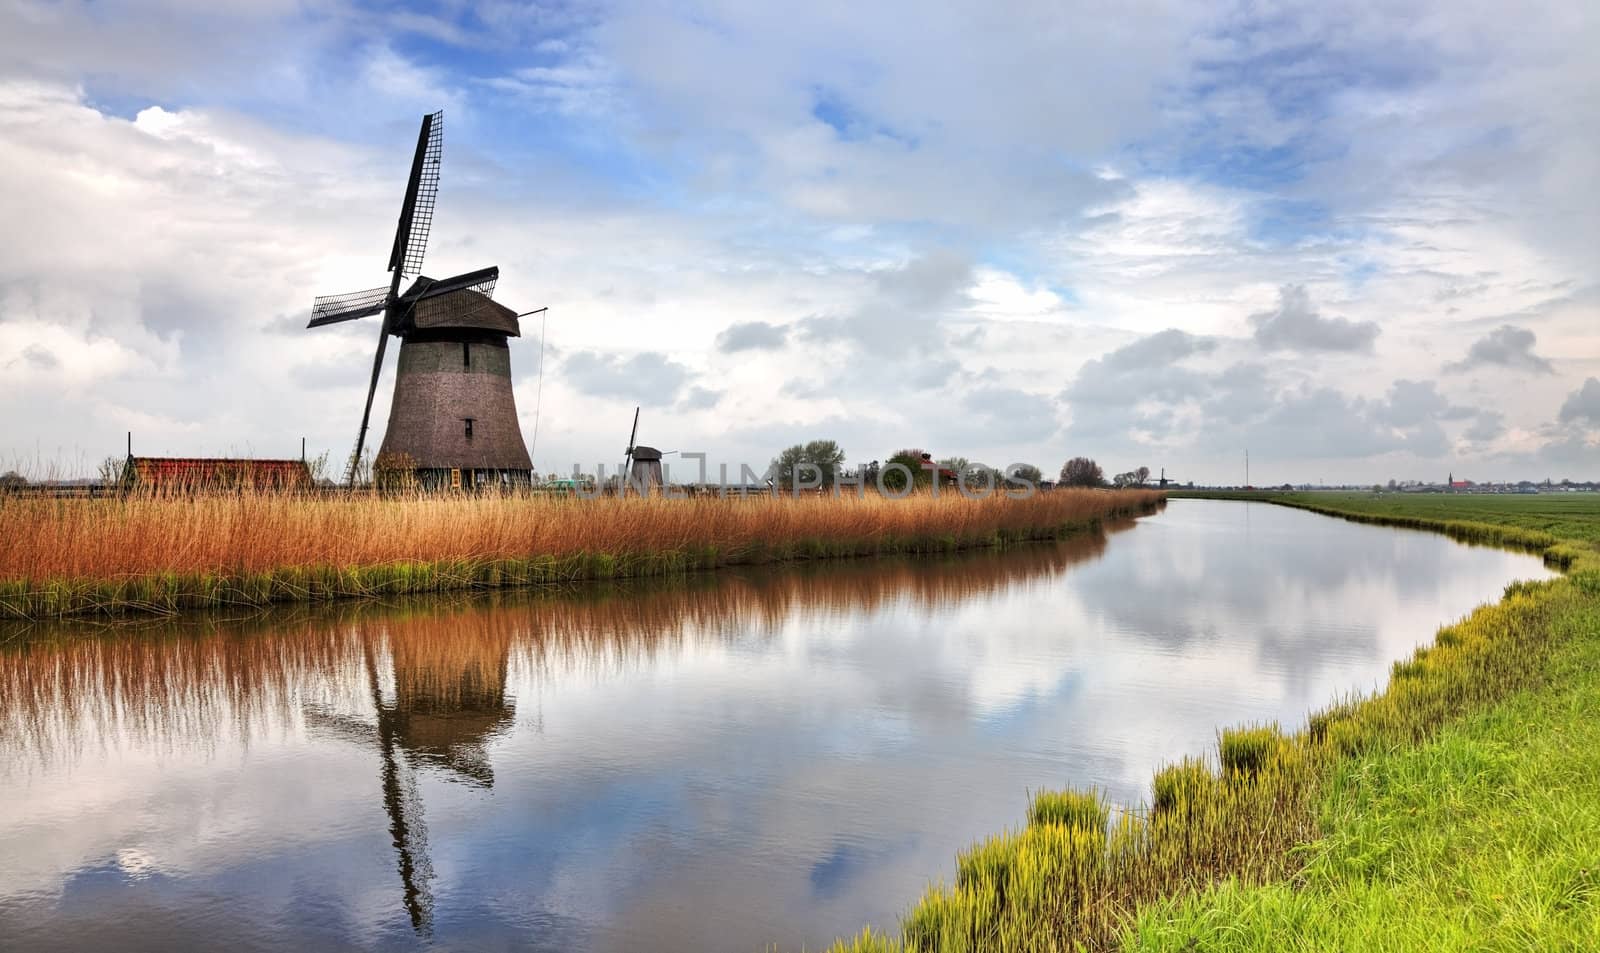 Image of a traditional Dutch windmill near a canal in a cloudy day.